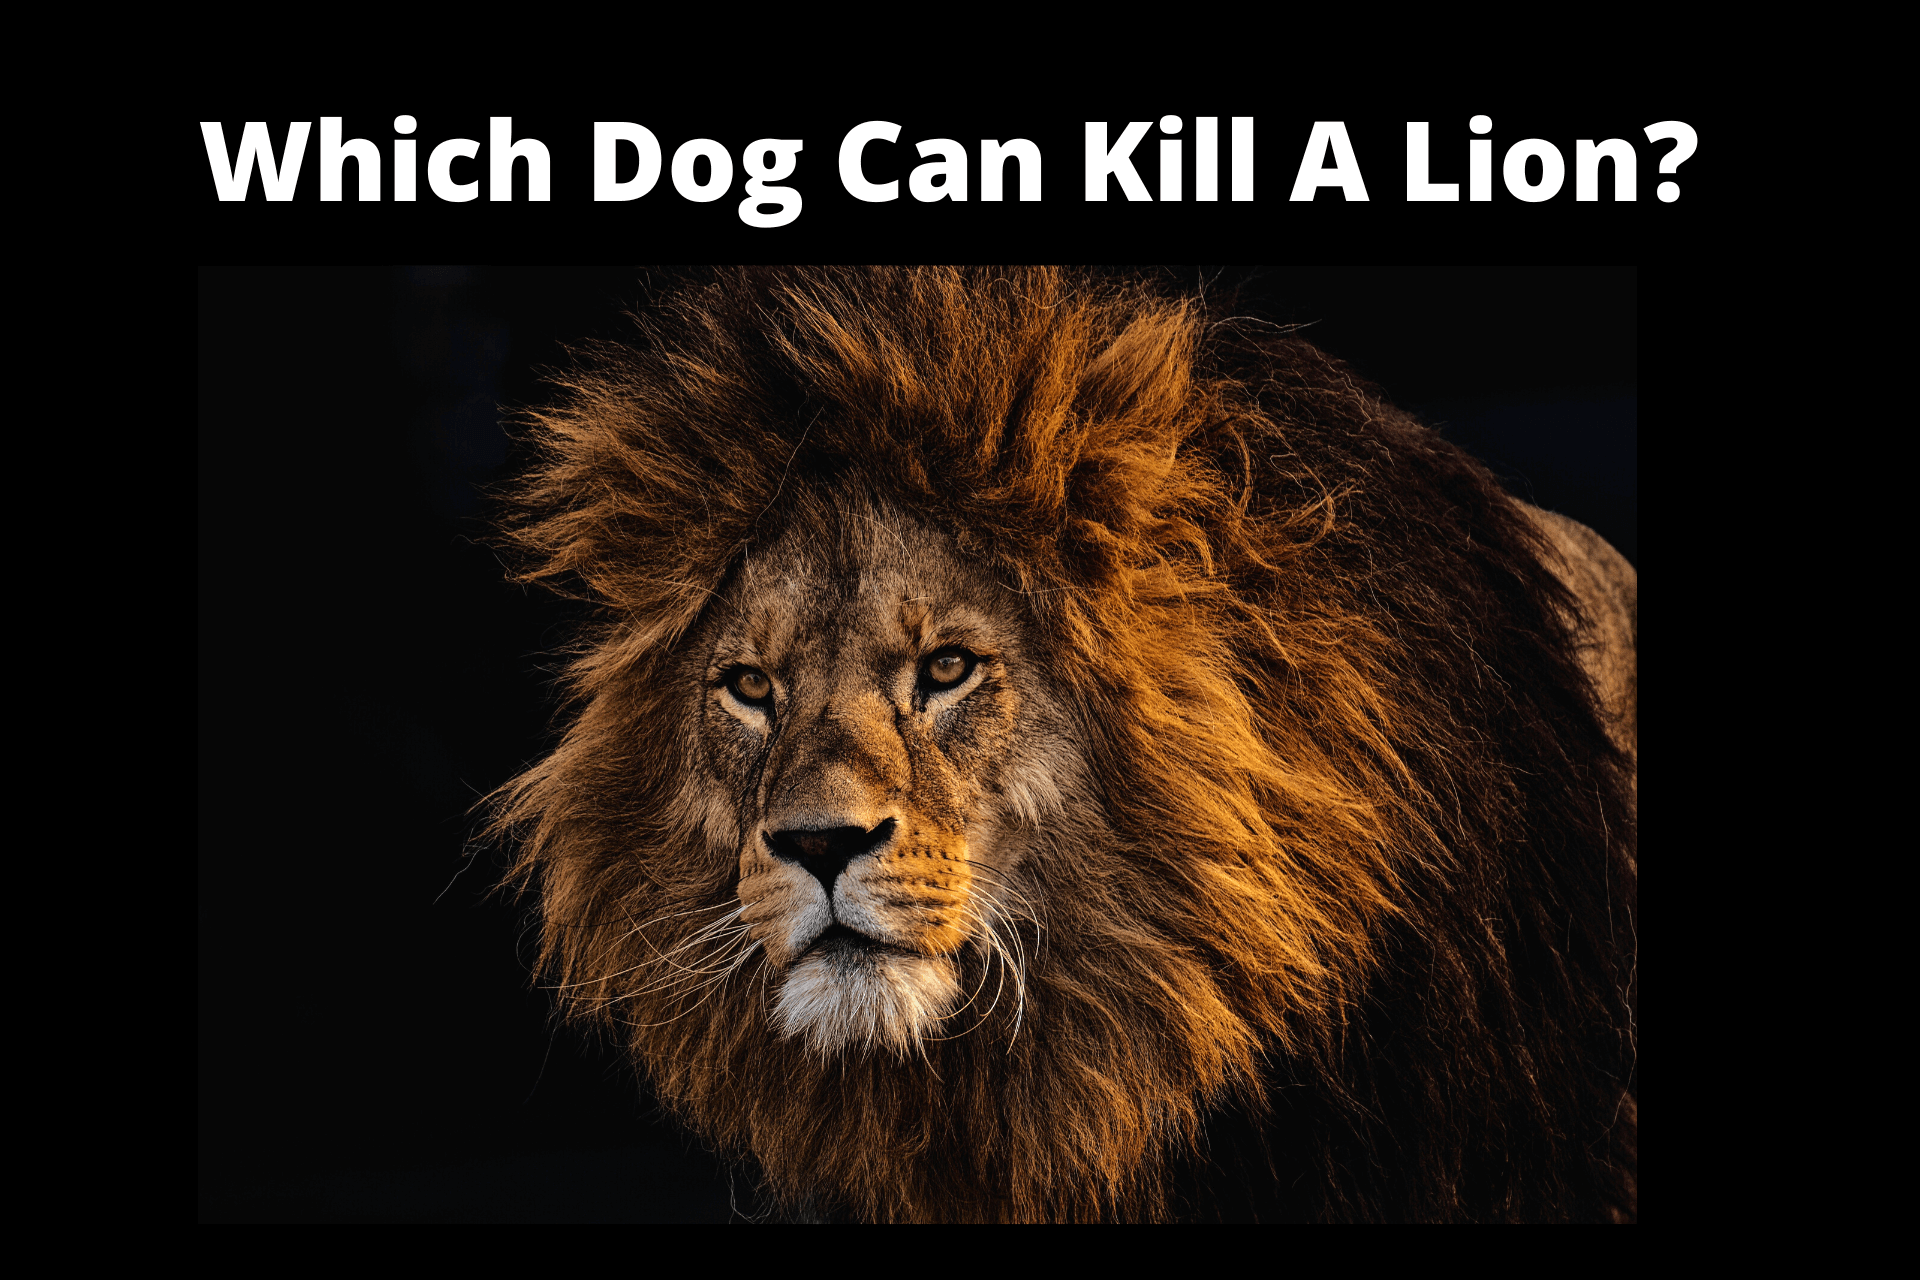 Which dog can kill a lion